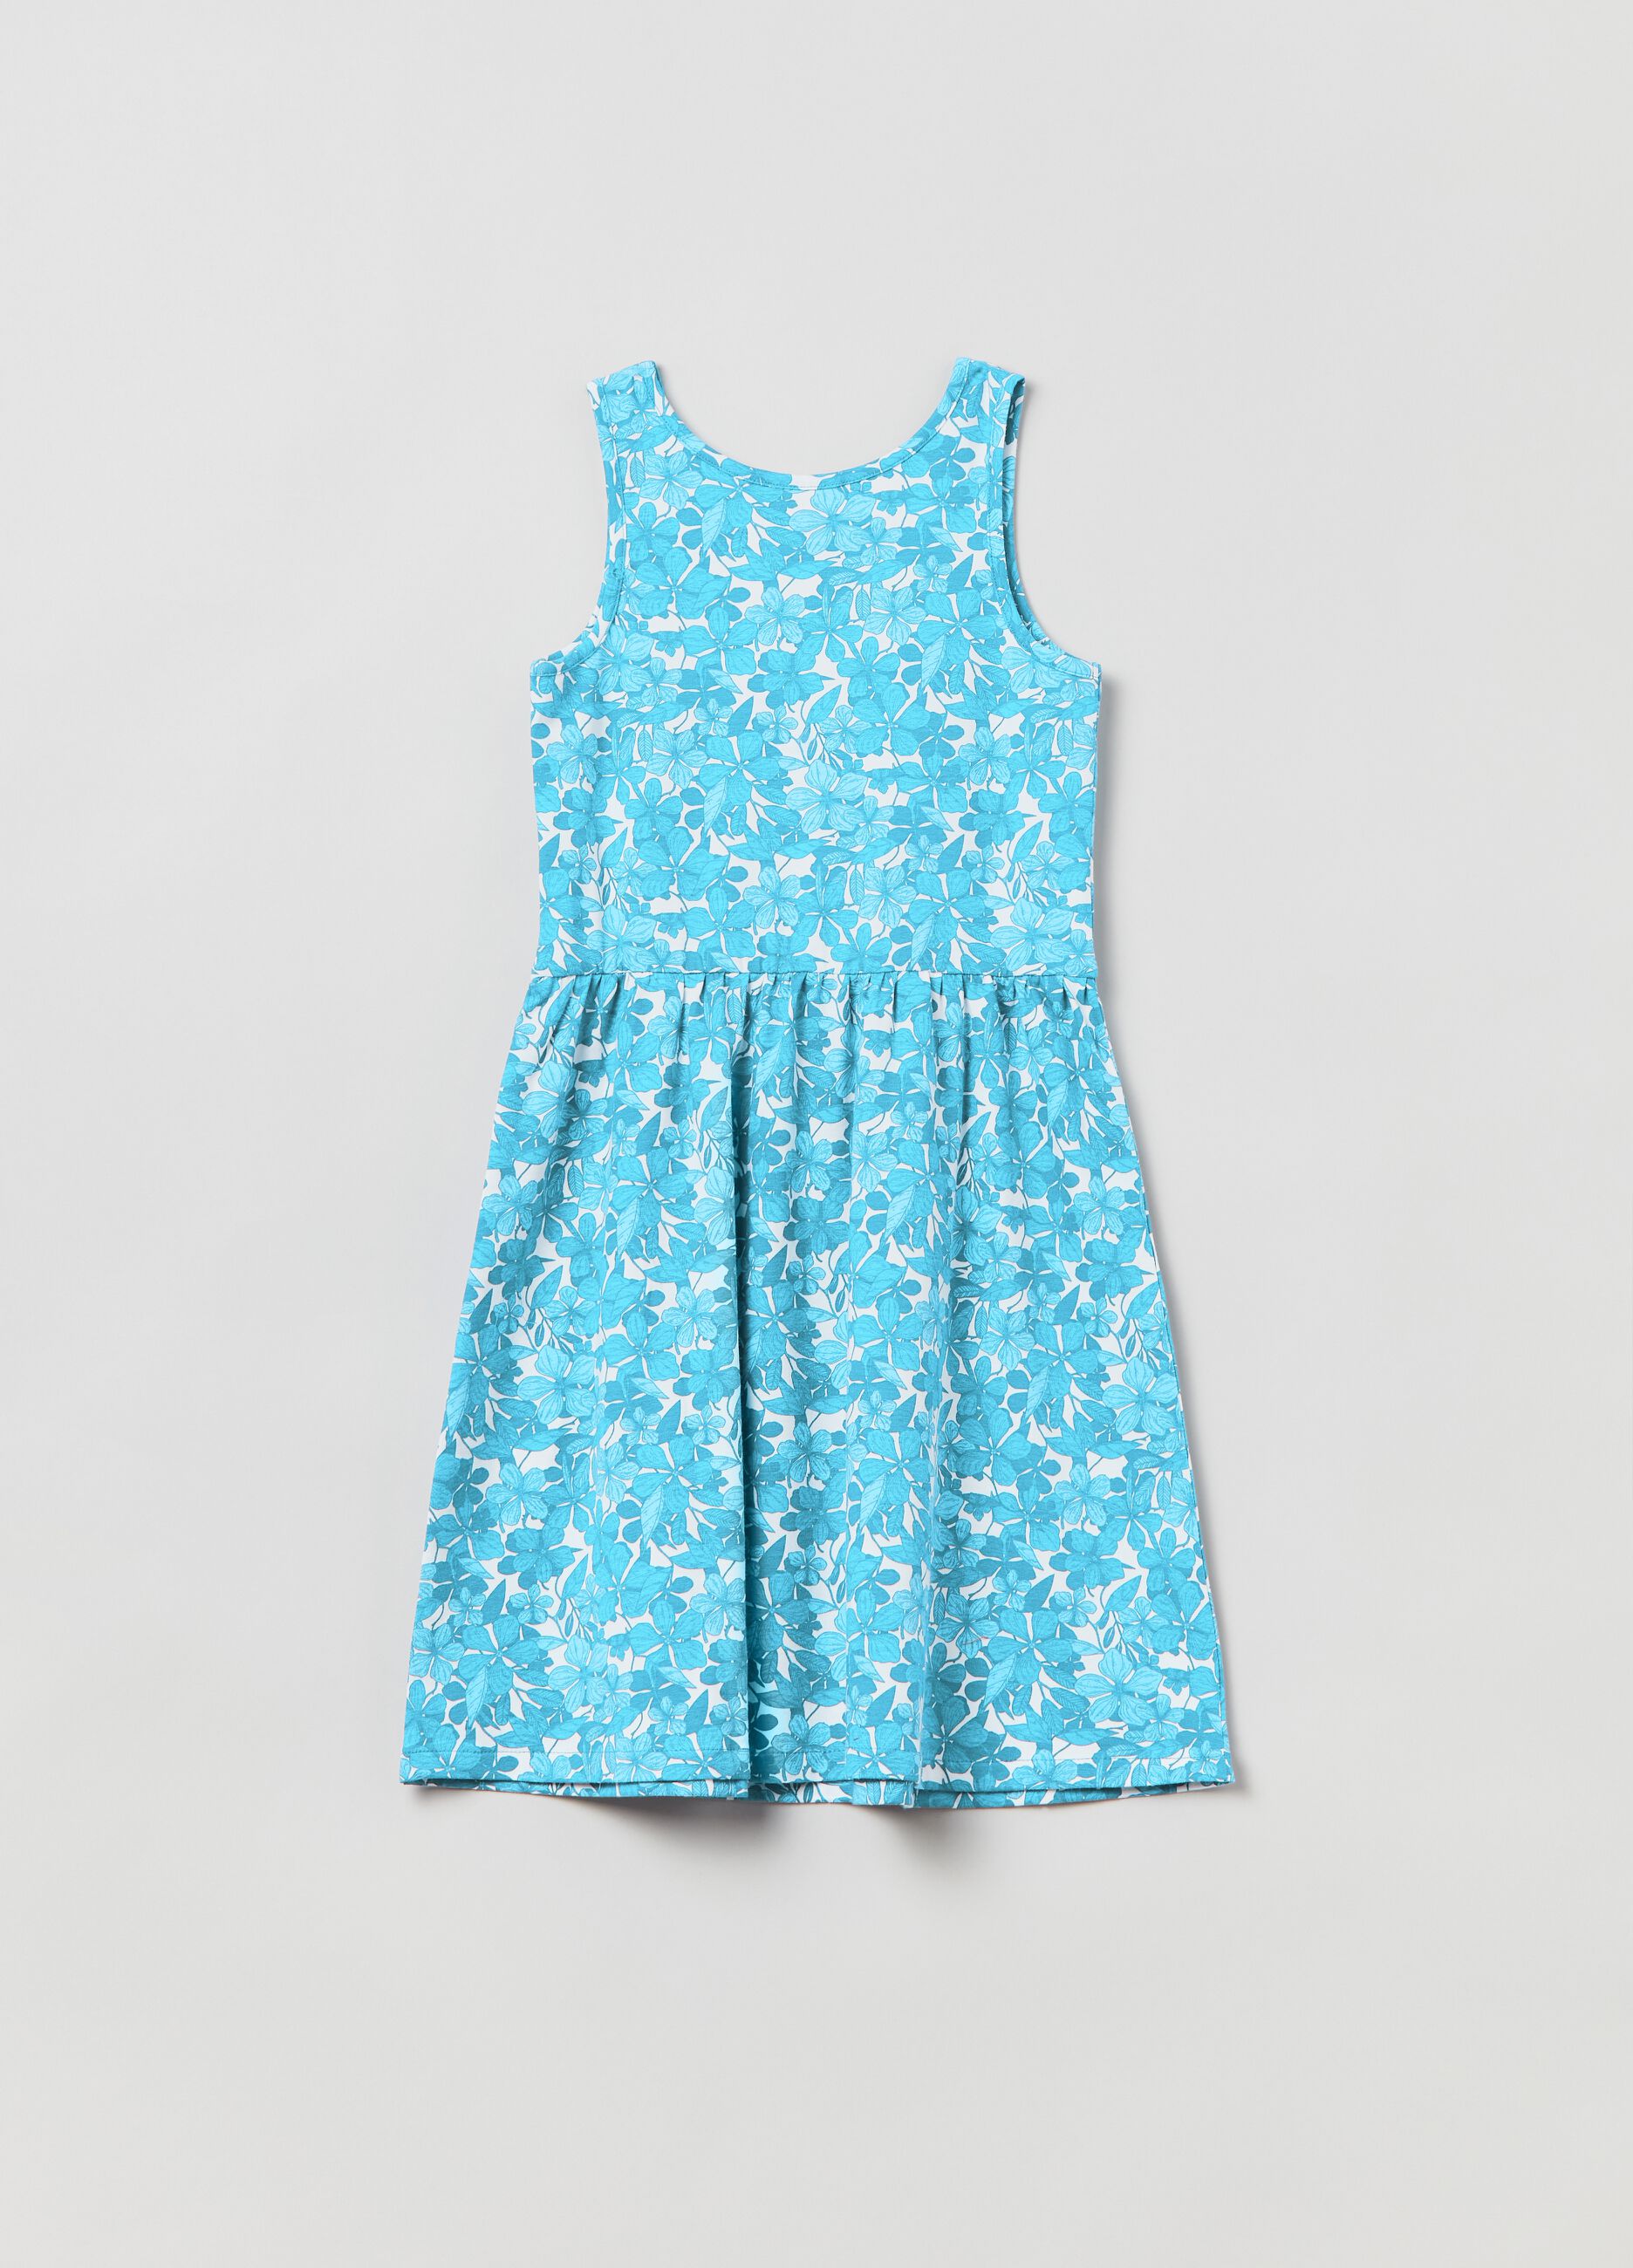 Sleeveless dress with floral pattern.